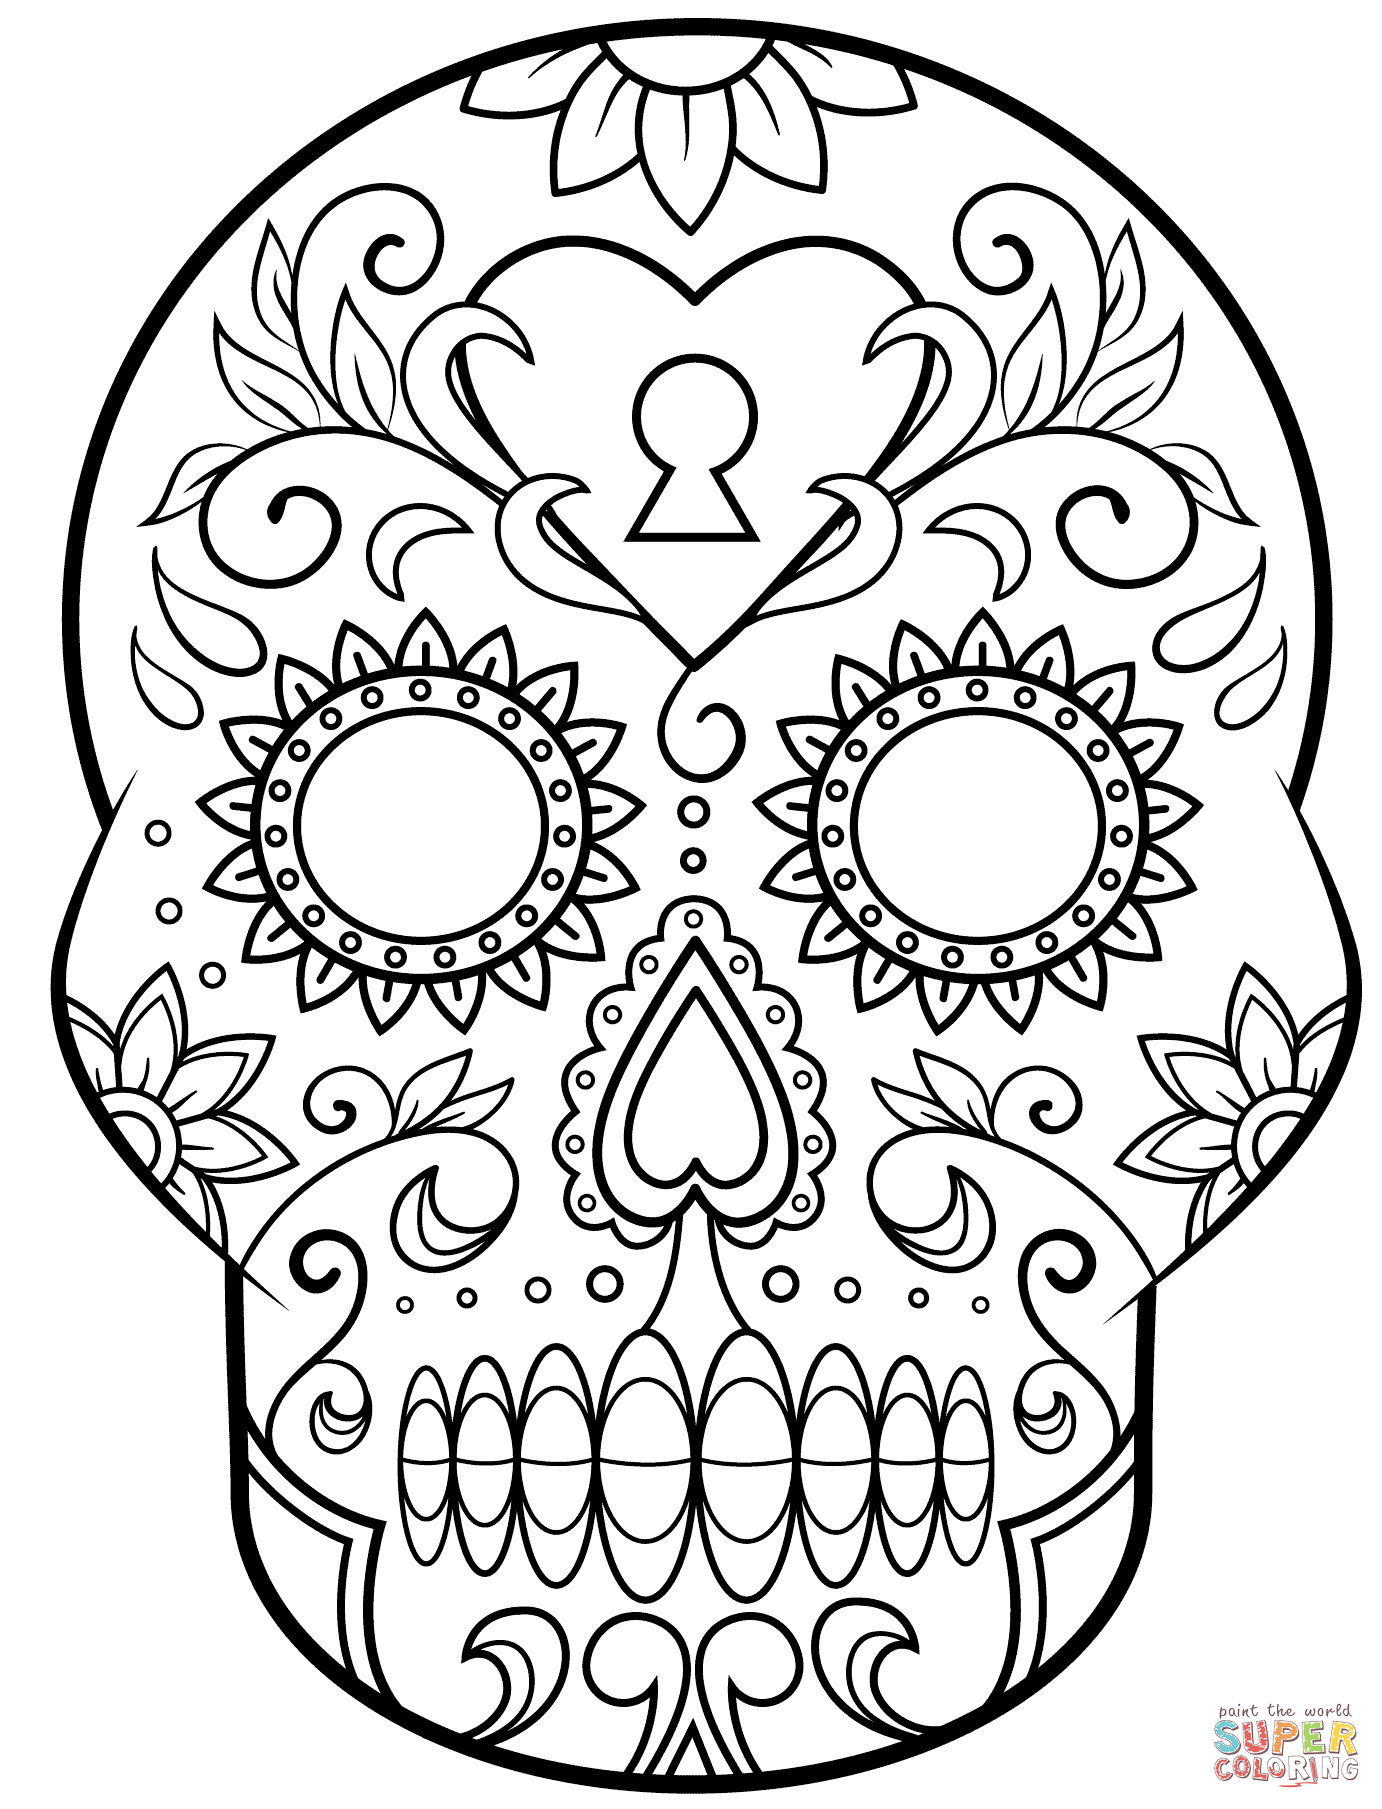 Sugar Skull Coloring Pages For Kids
 Day of the Dead Sugar Skull coloring page